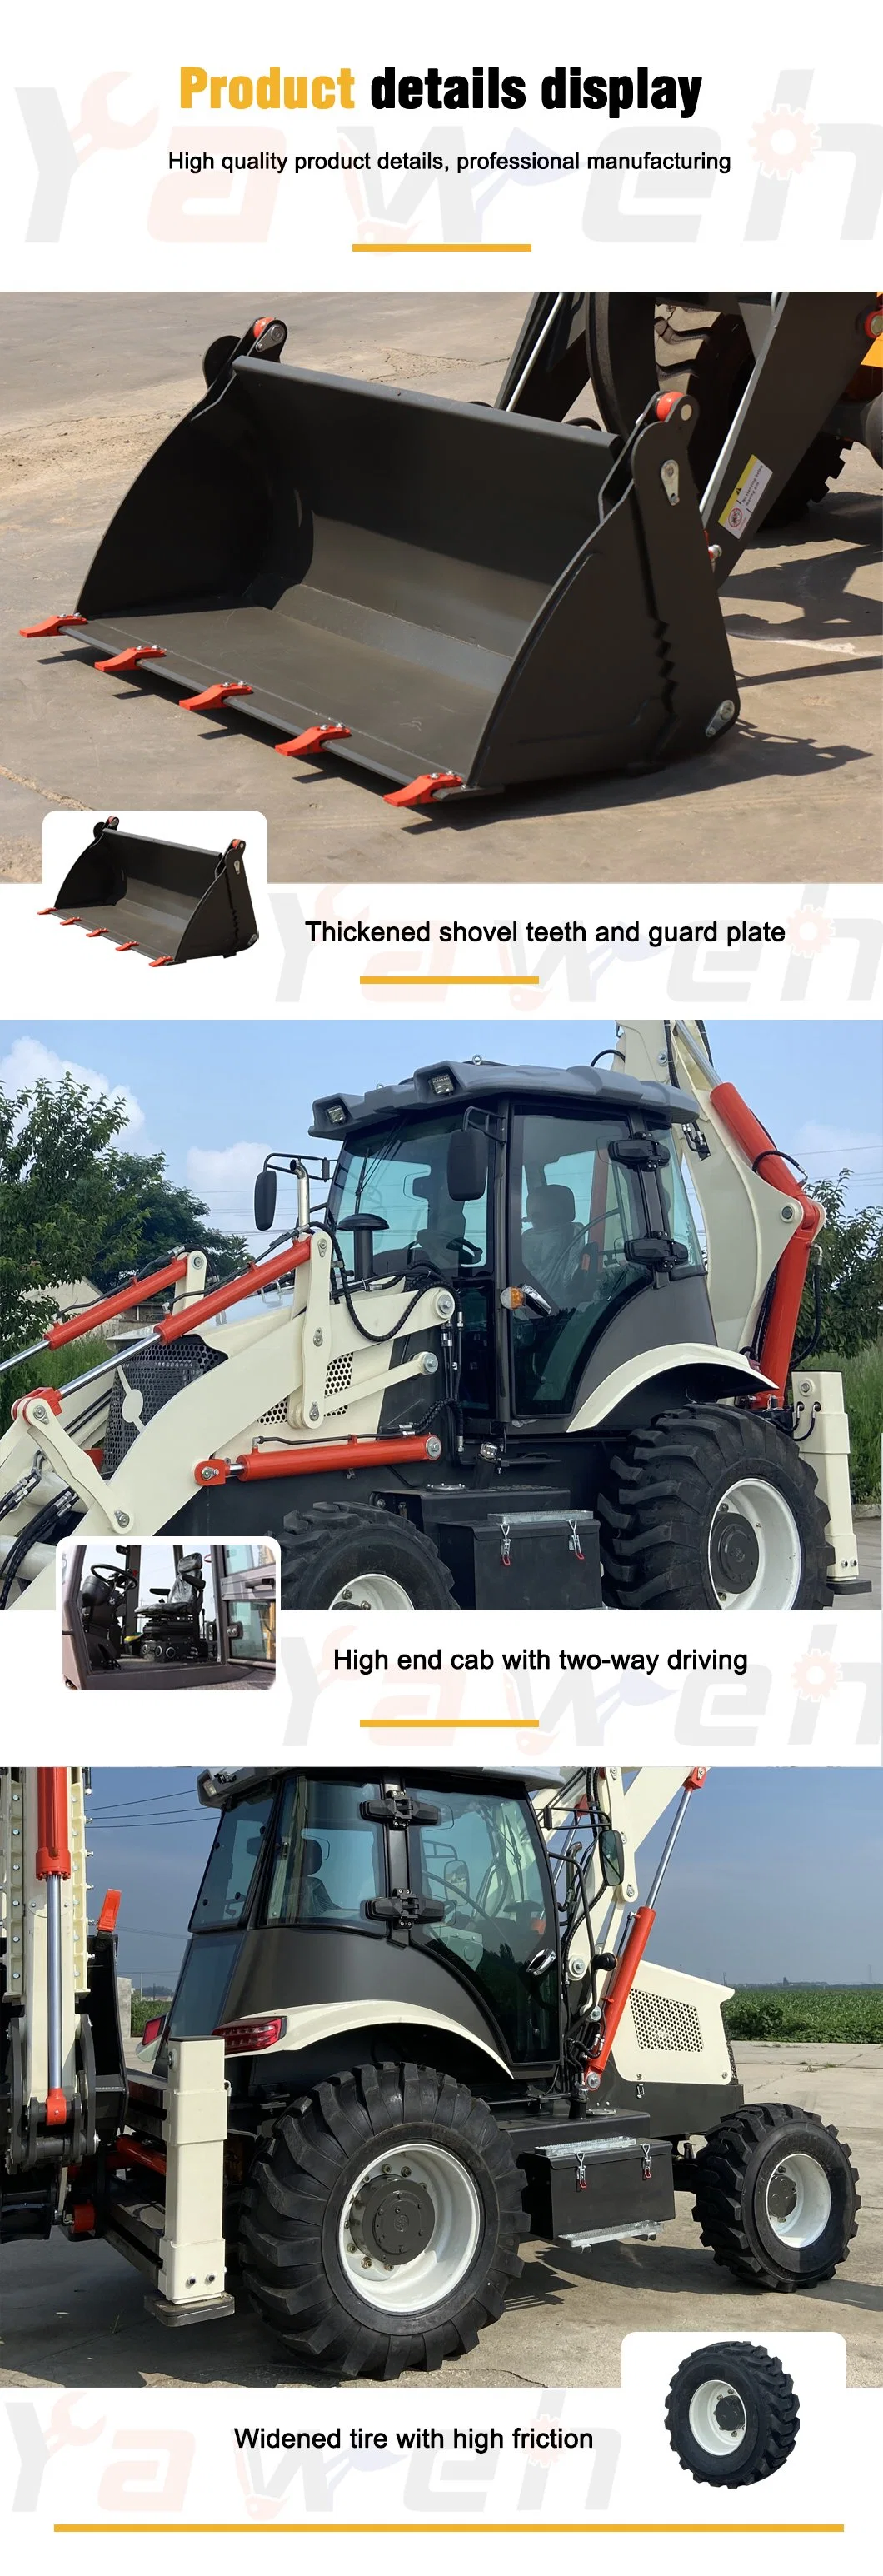 Small Excavator Backhoe Loader Wheel with Backhoe Versatile Powerful and Efficient